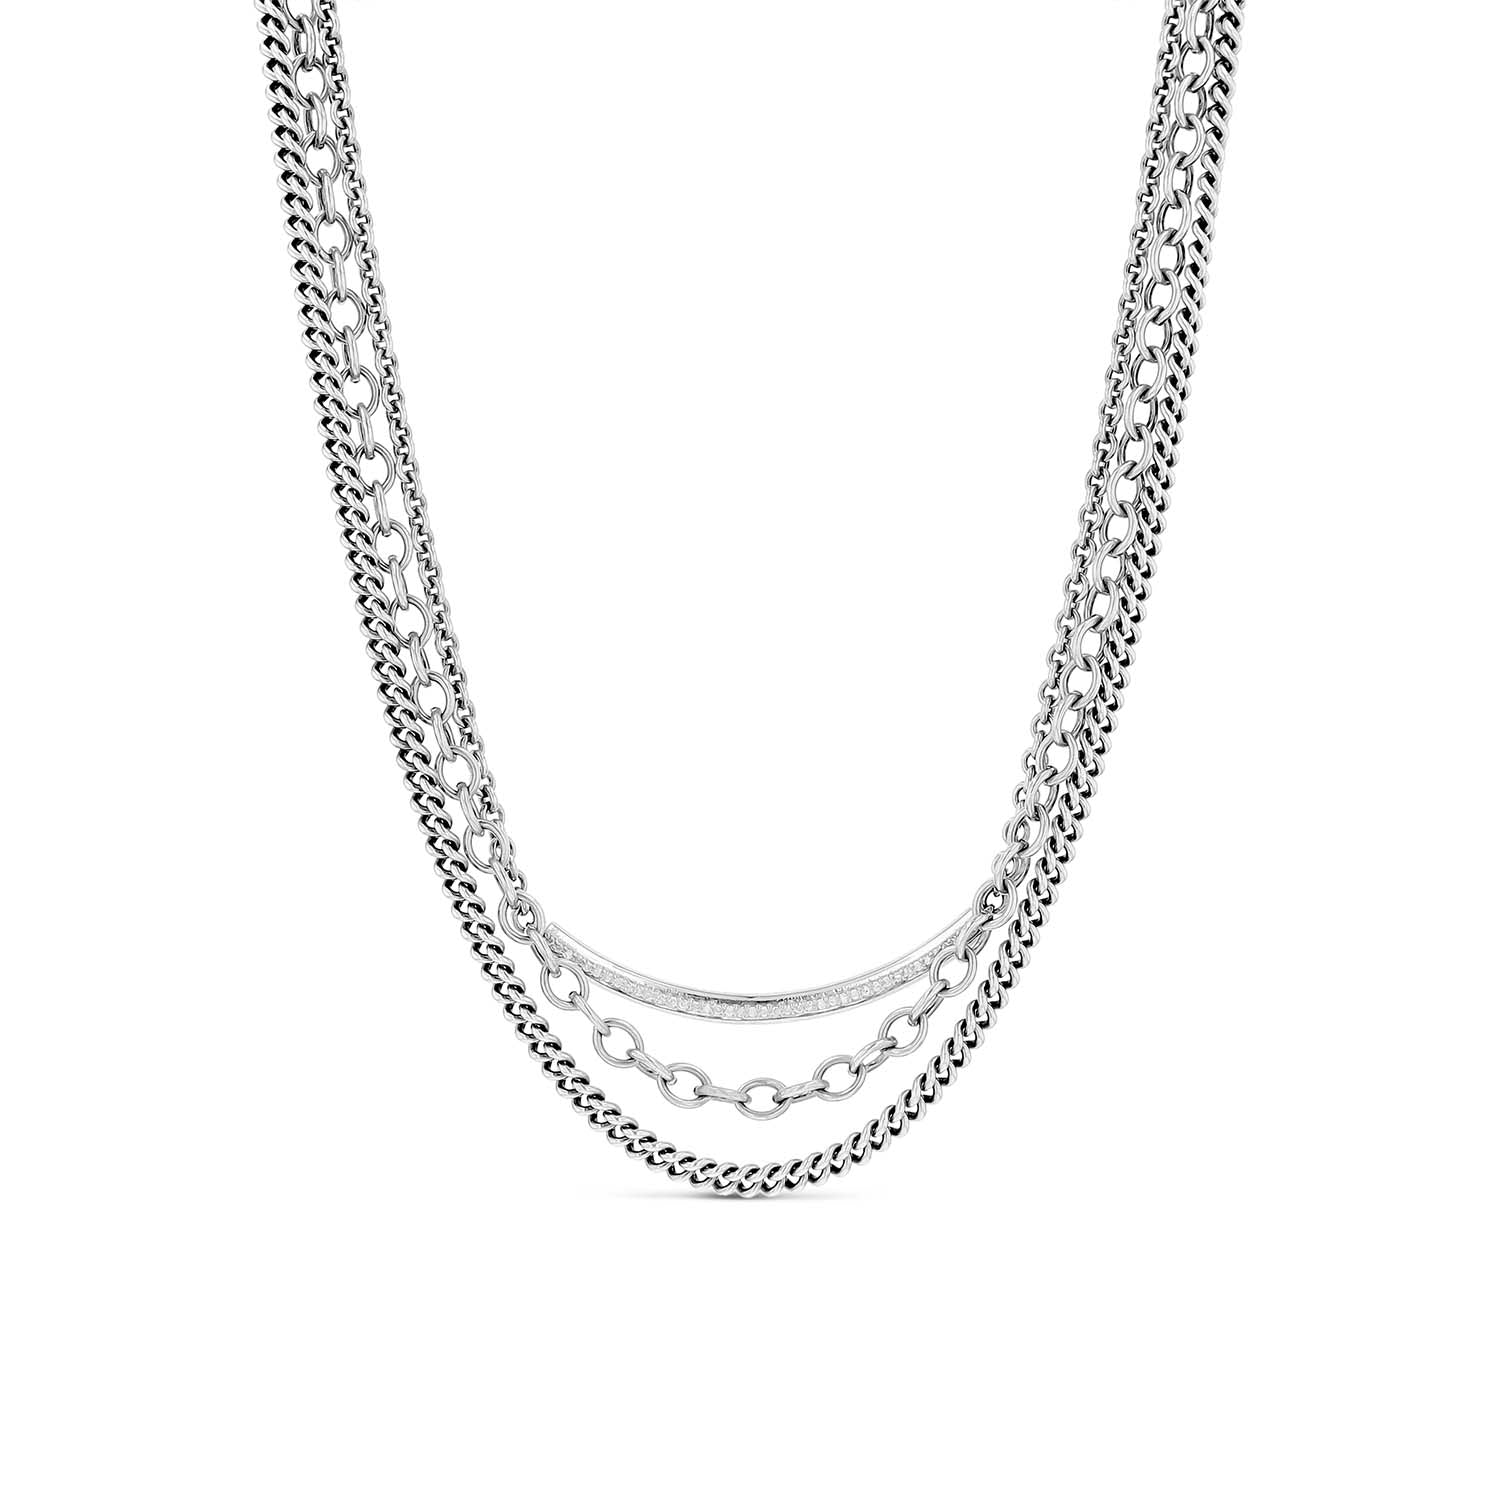 Triple Chain Necklace with Diamond Smile Bar  N0002477 - TBird